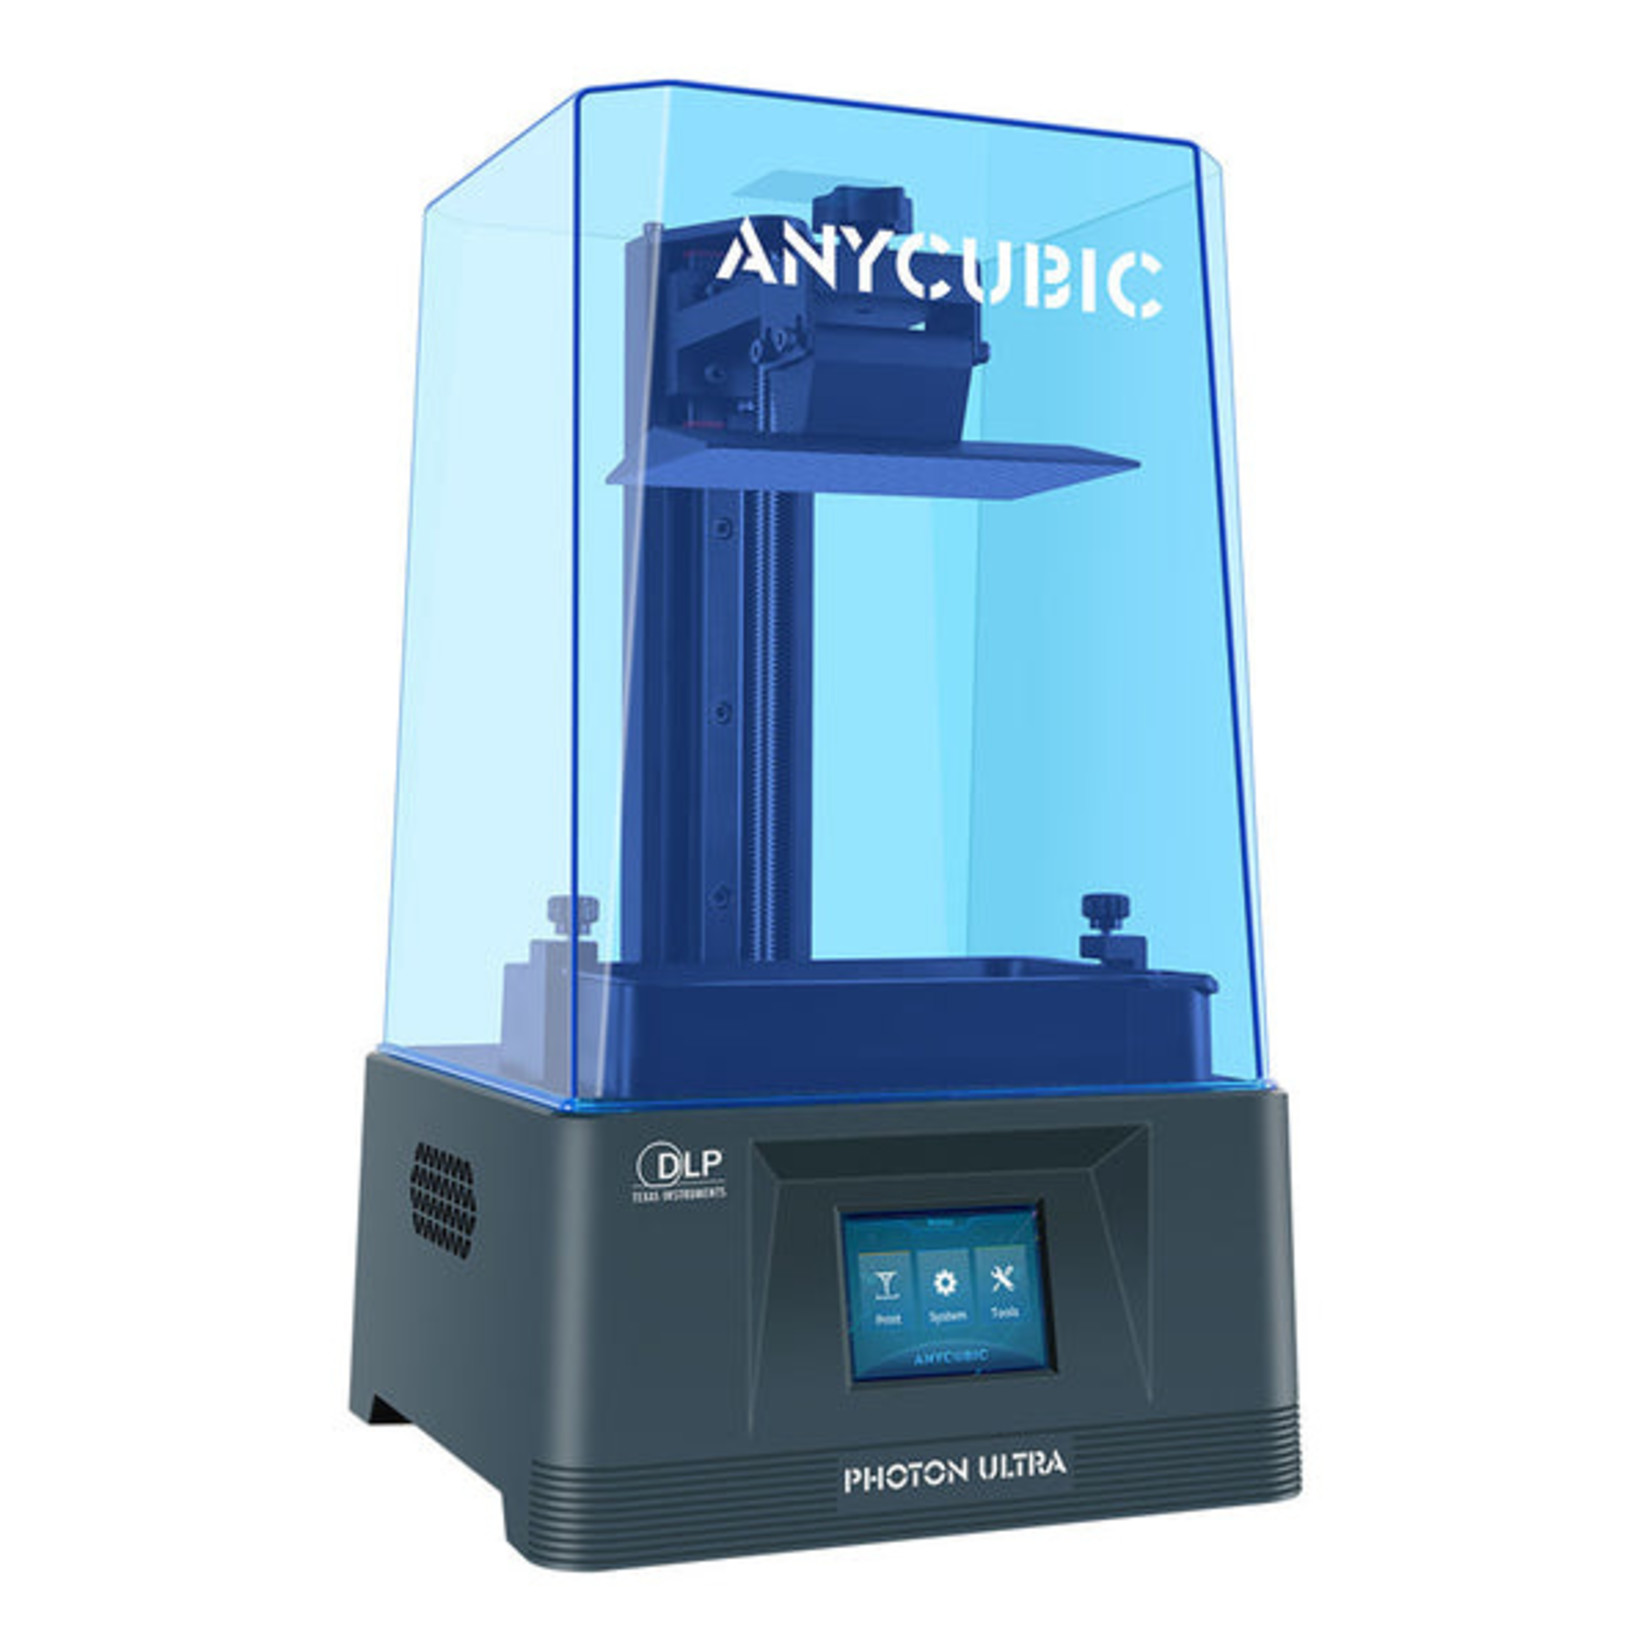 Anycubic Anycubic Photon Ultra DLP